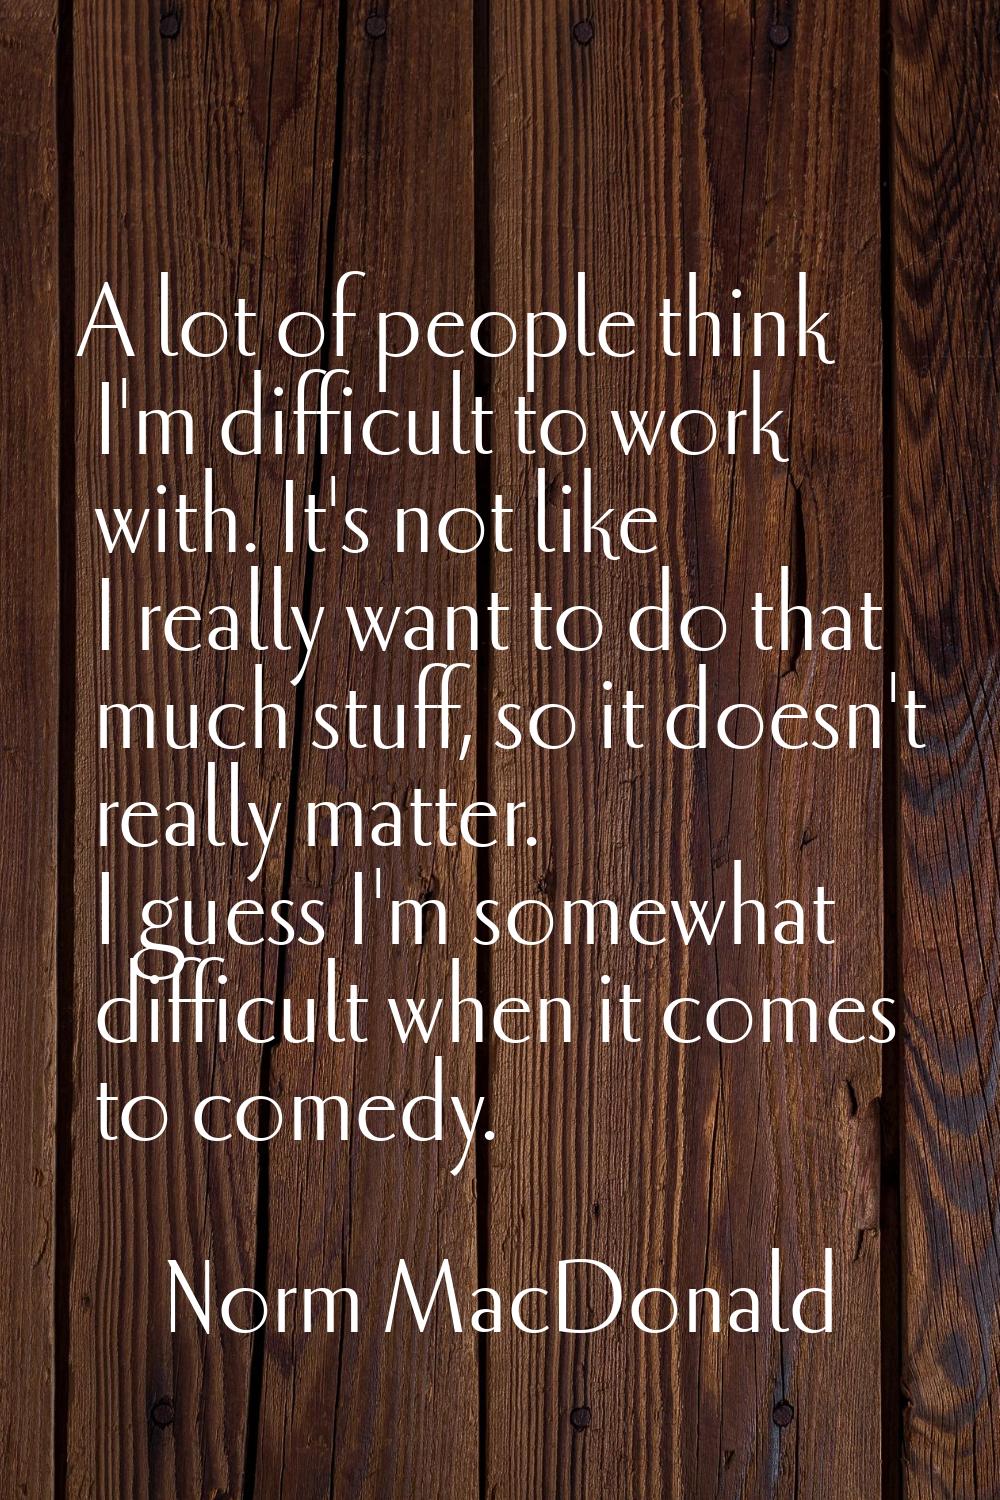 A lot of people think I'm difficult to work with. It's not like I really want to do that much stuff